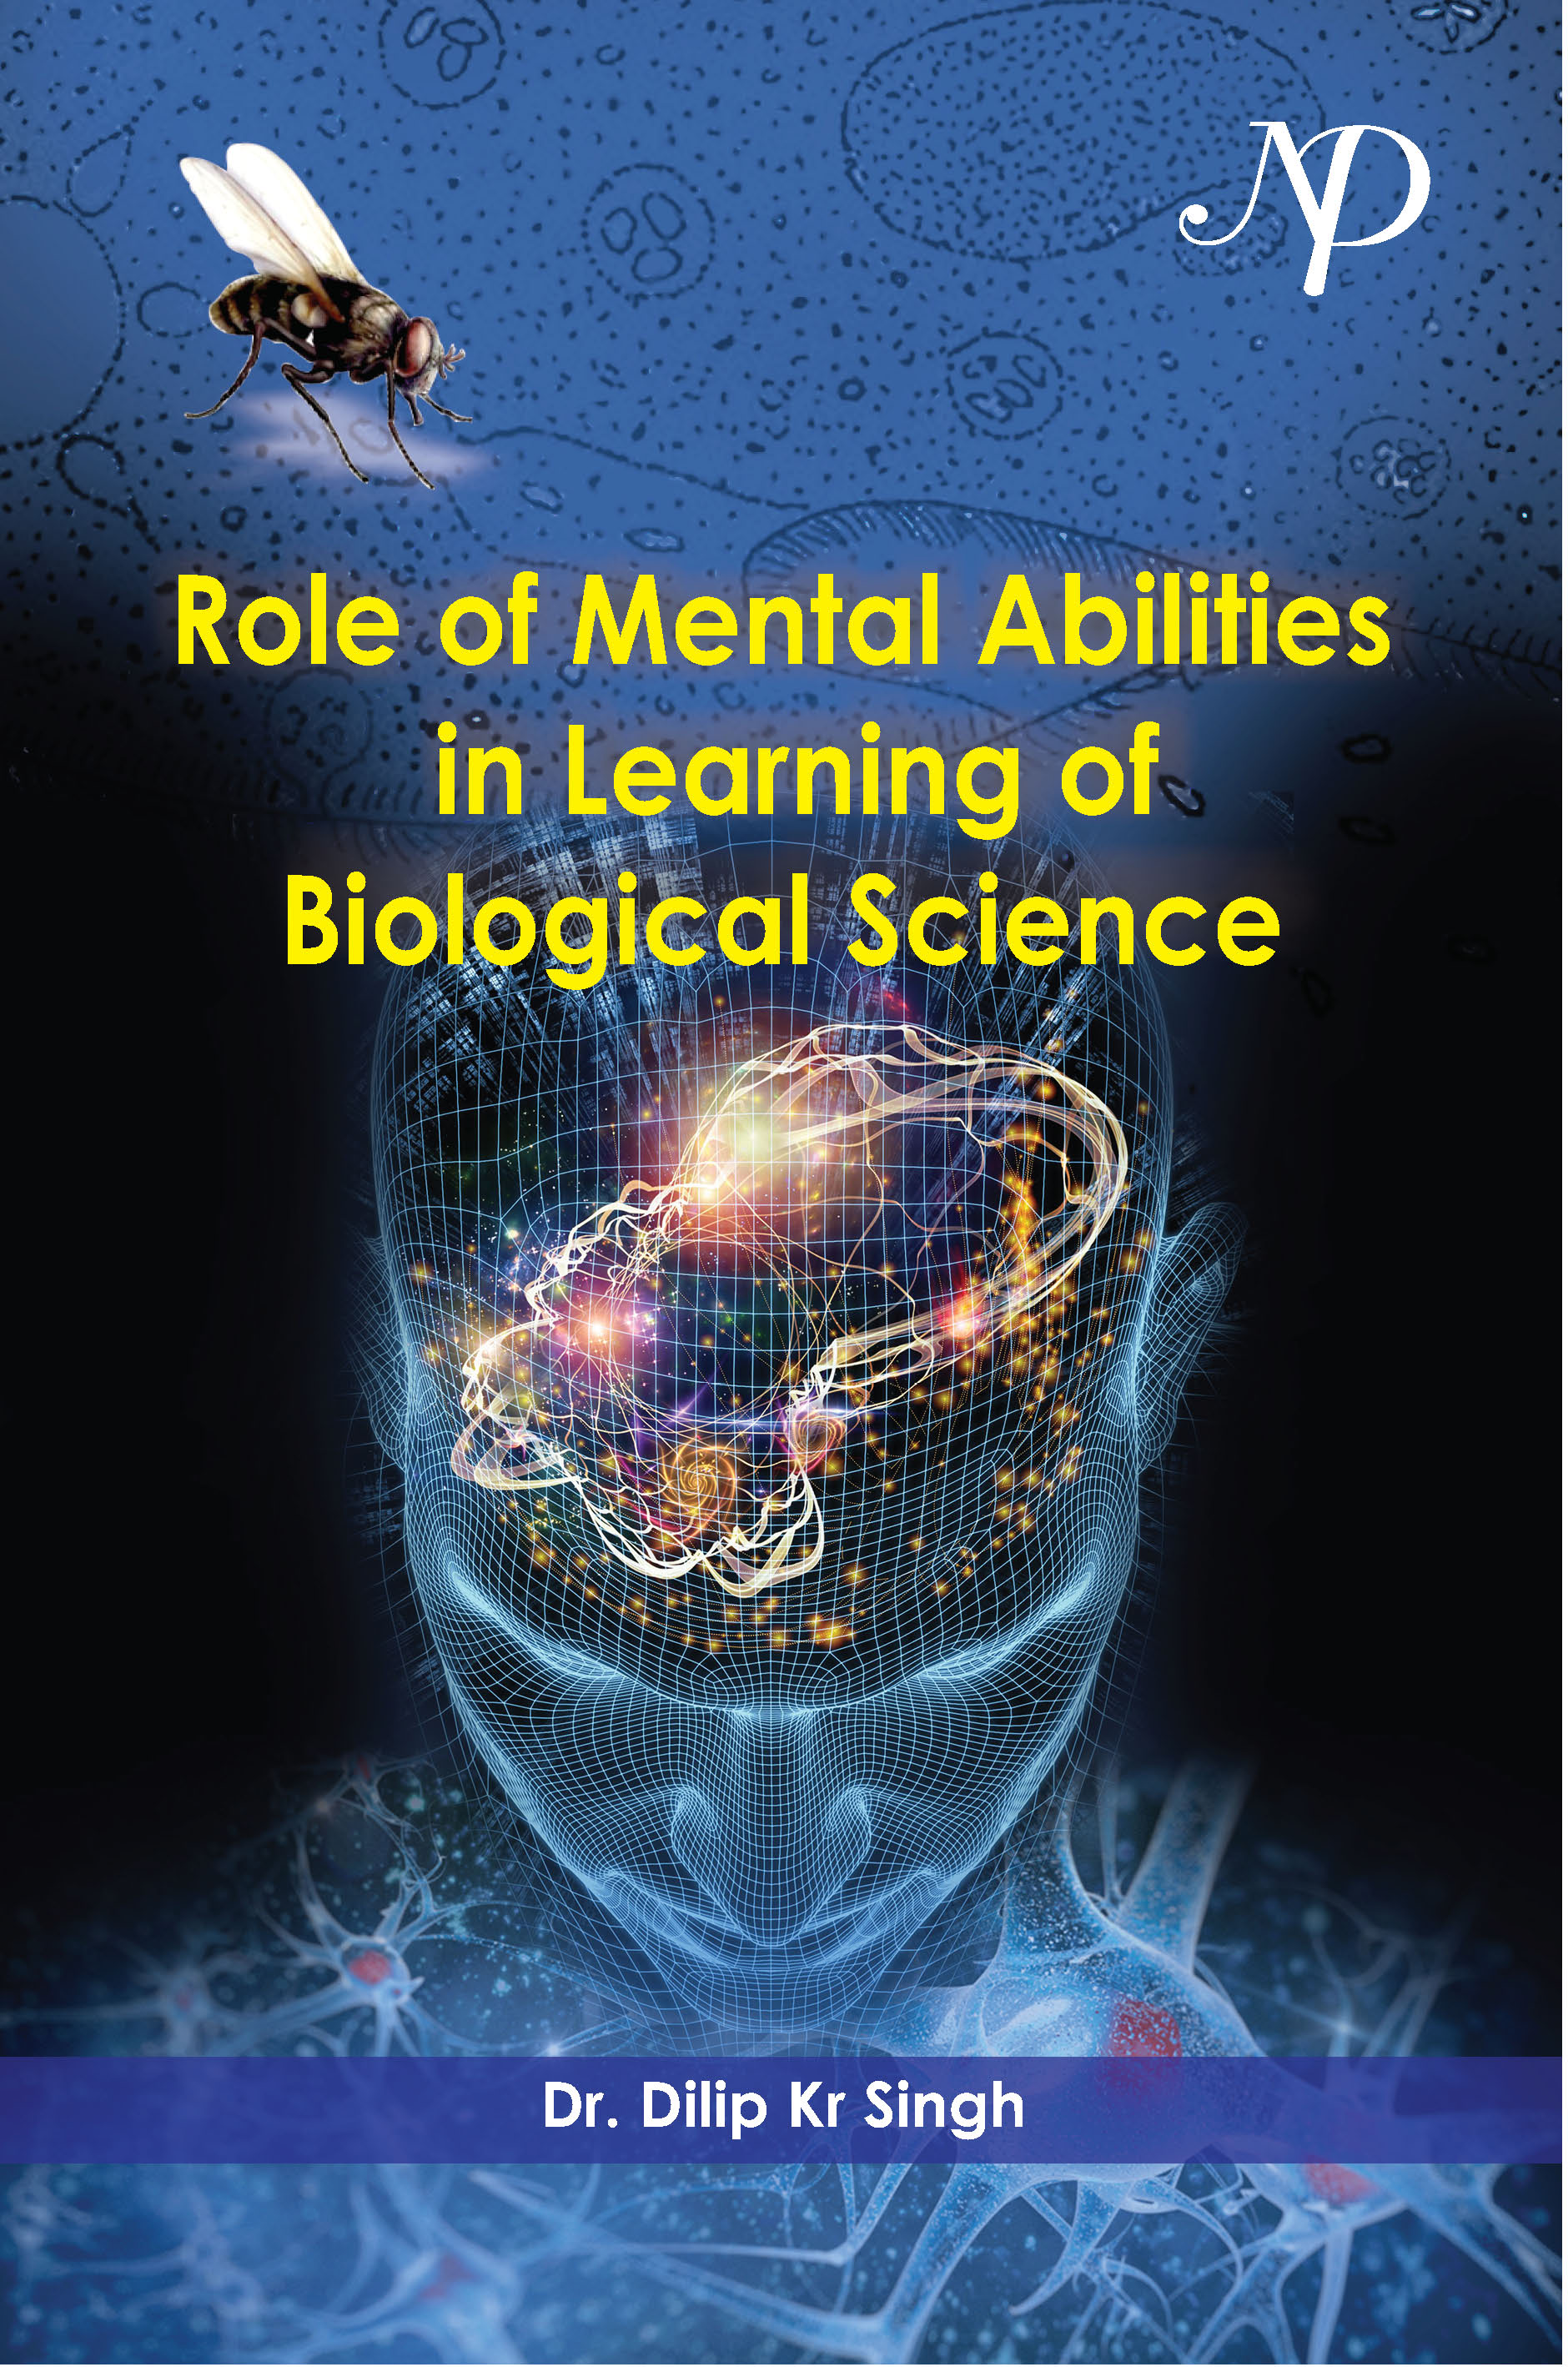 Role of mental abilities in learning of biological science Cover.jpg